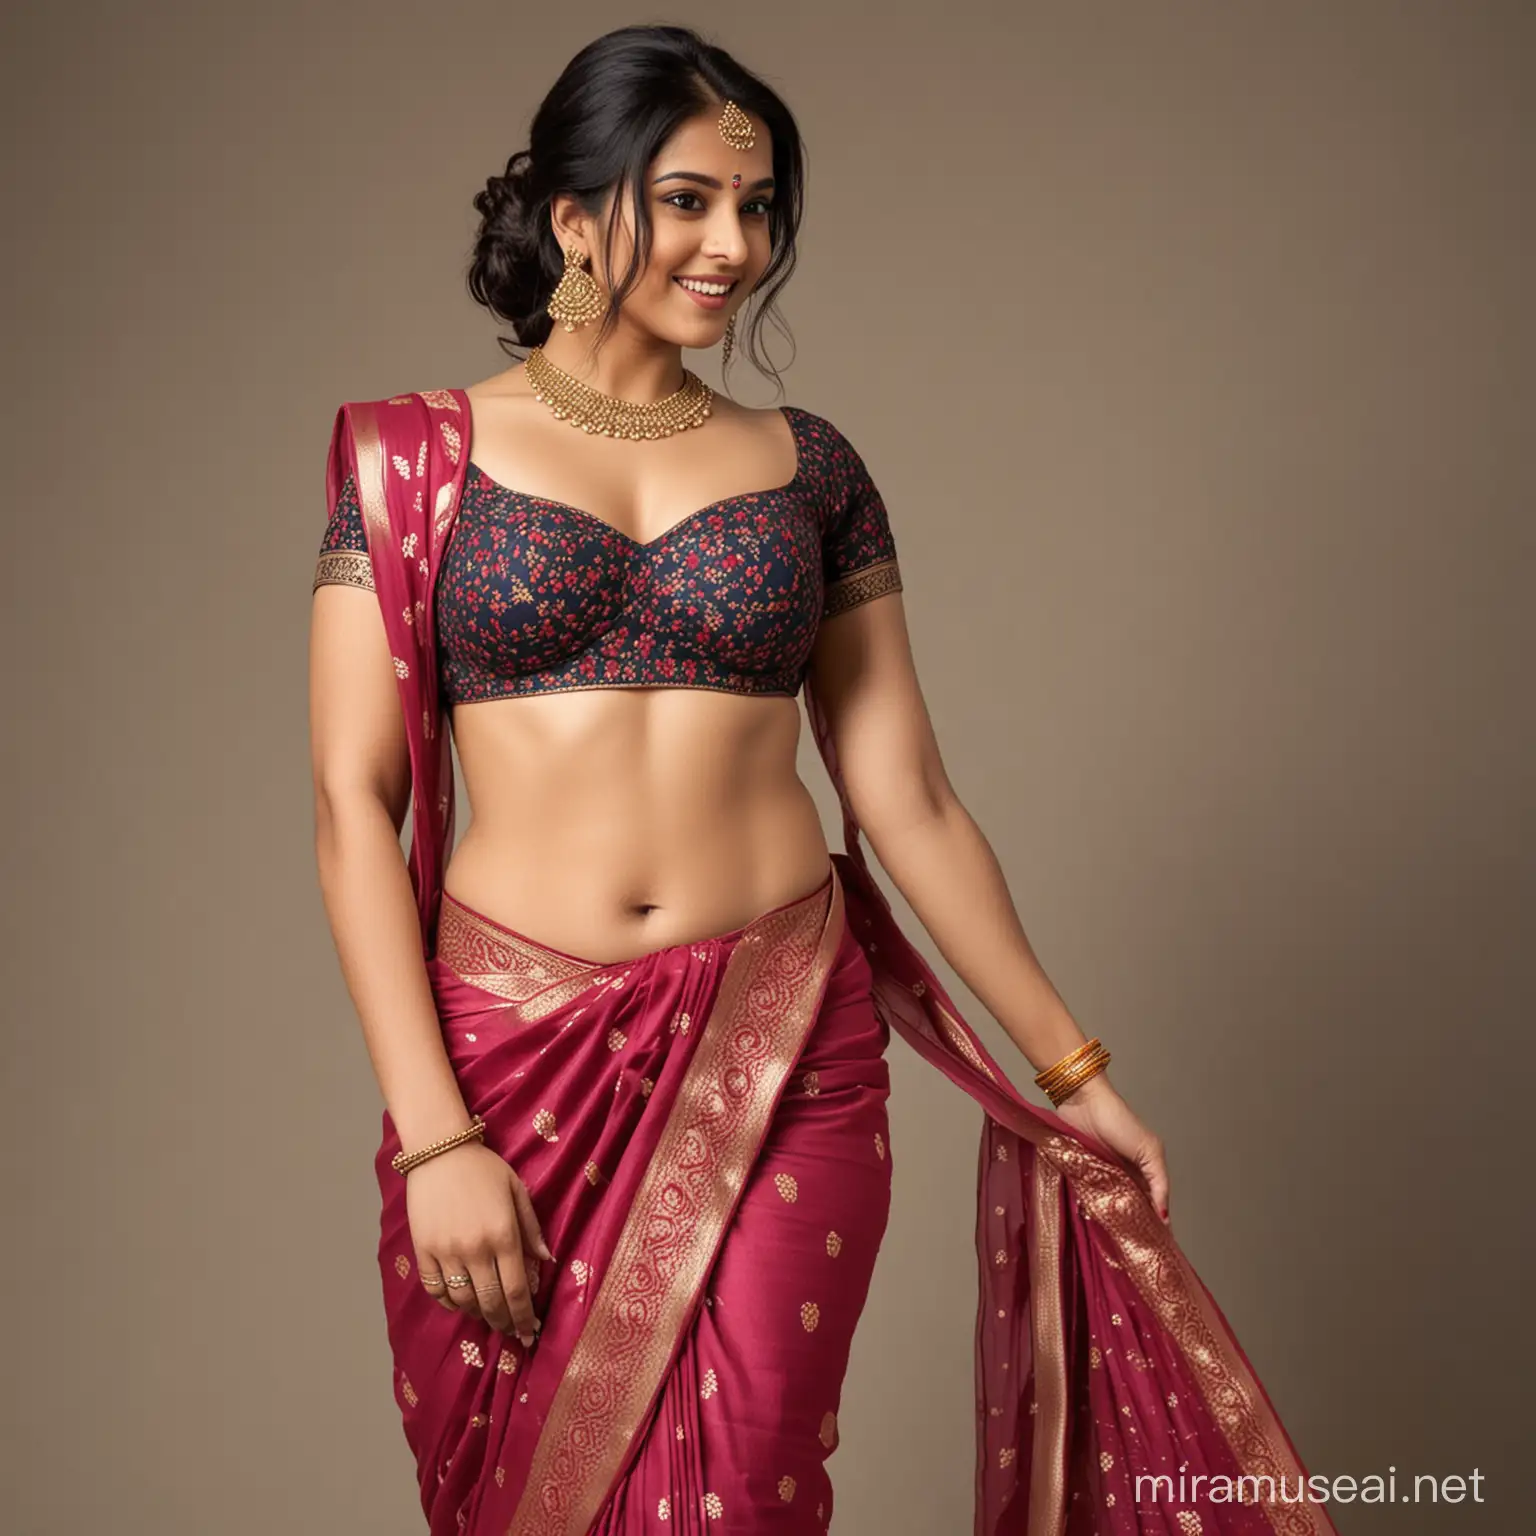 Indian women showing navel in a tradition saree dress, curvy body.